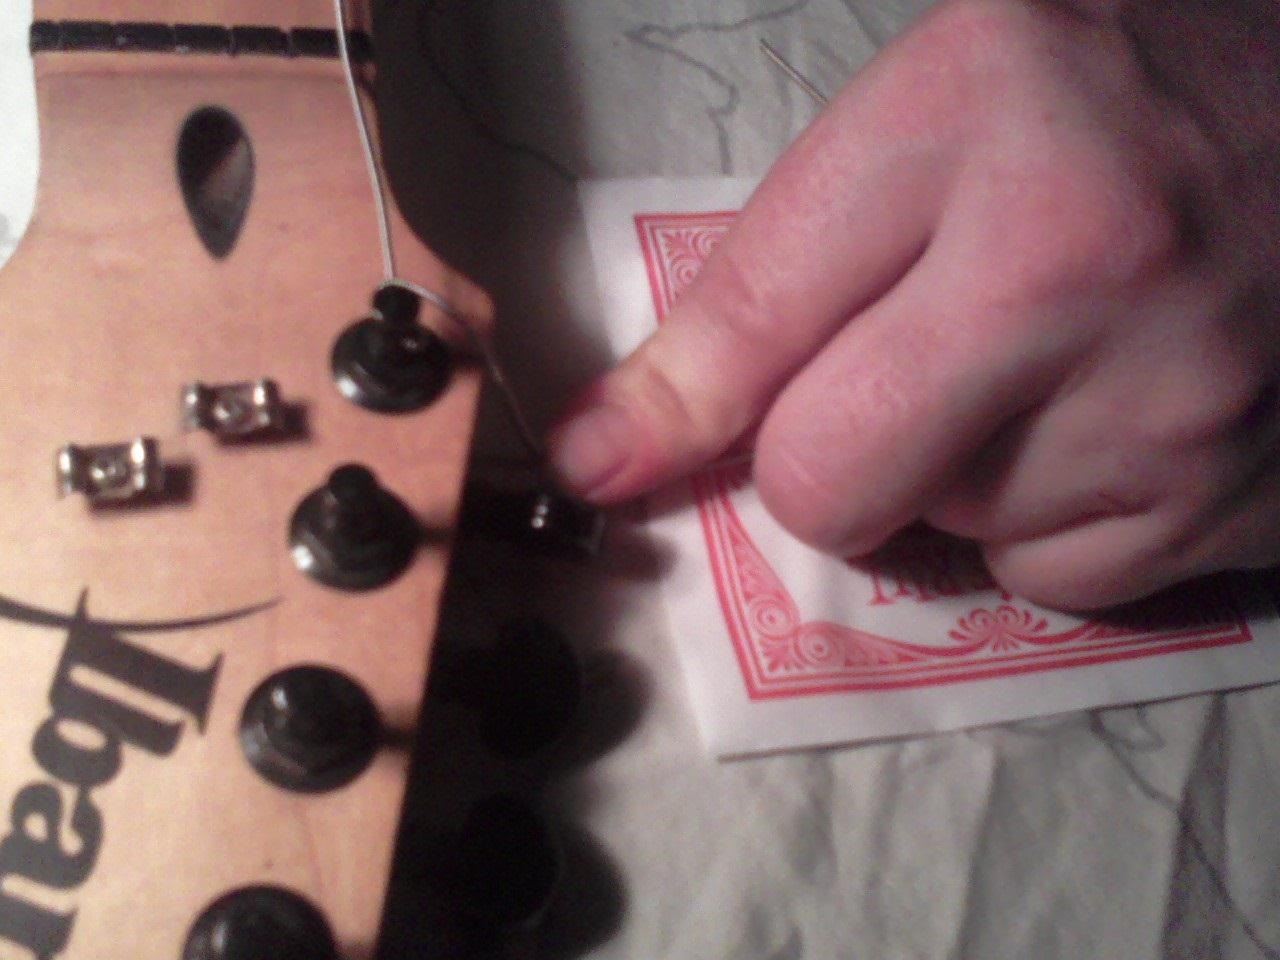 How to Restring & Tune an Electric Guitar